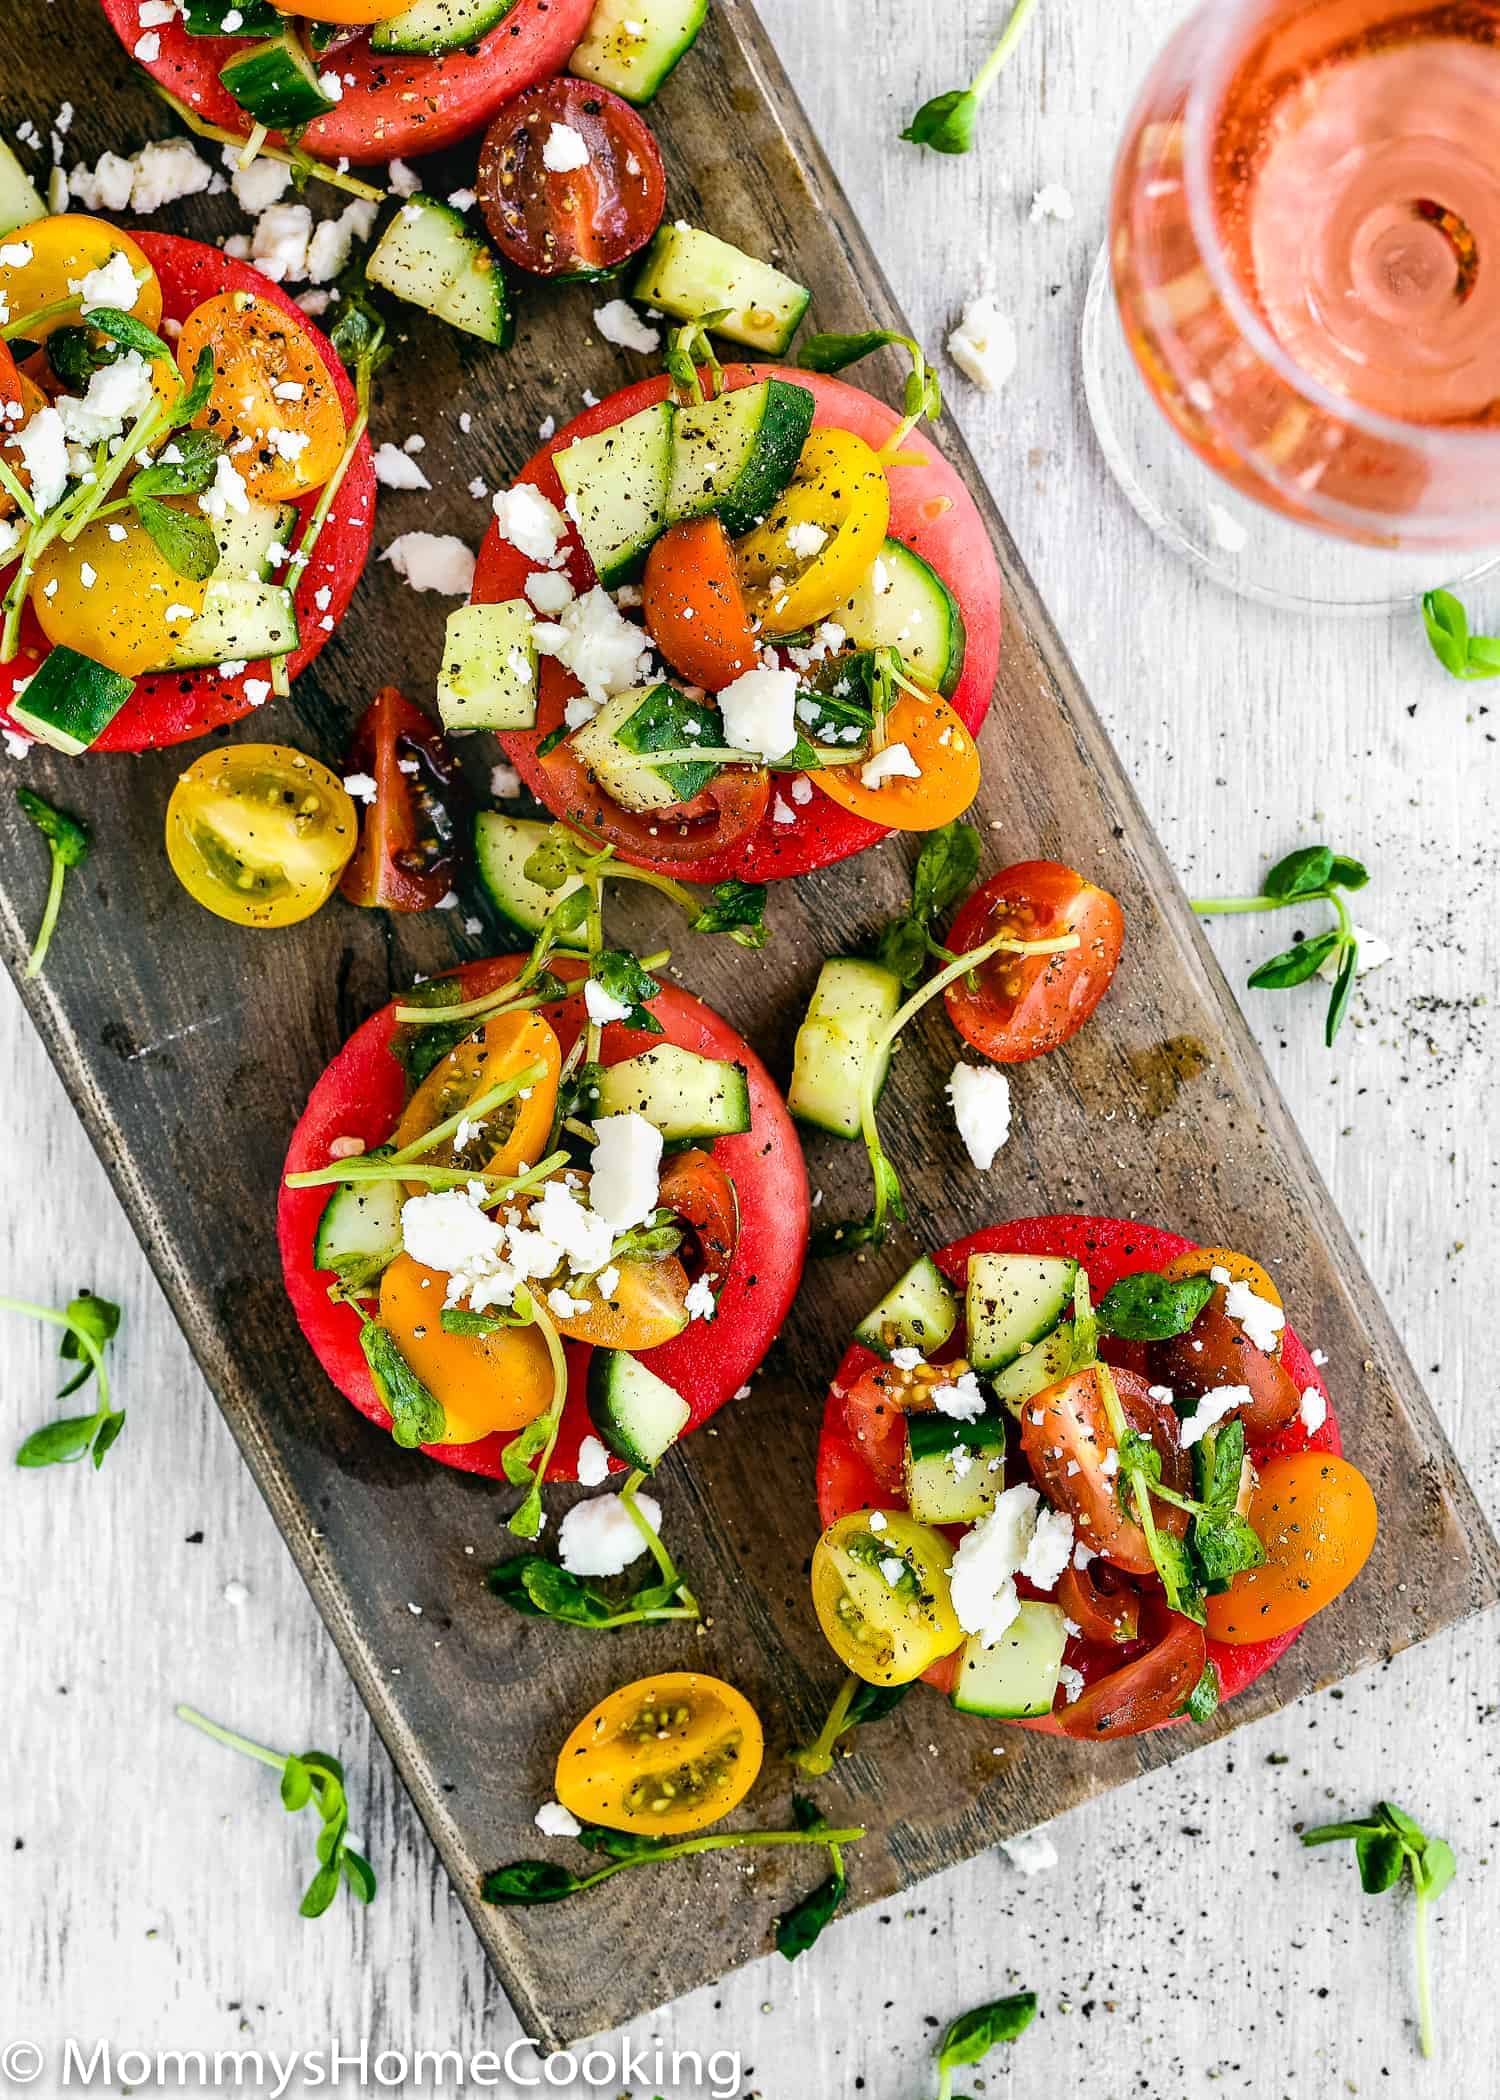 This Low-Carb Watermelon Bruschetta is sweet, savory, fruity, salty, zesty and totally delicious! All you need are a few ingredients and 15 minutes, or less, of chopping. Perfect idea for a super fun Girls Night In, for potlucks, or brunch, lunch, or dinners. Pair it with a glass of rosé for an unforgettable bite. https://mommyshomeccoking.com